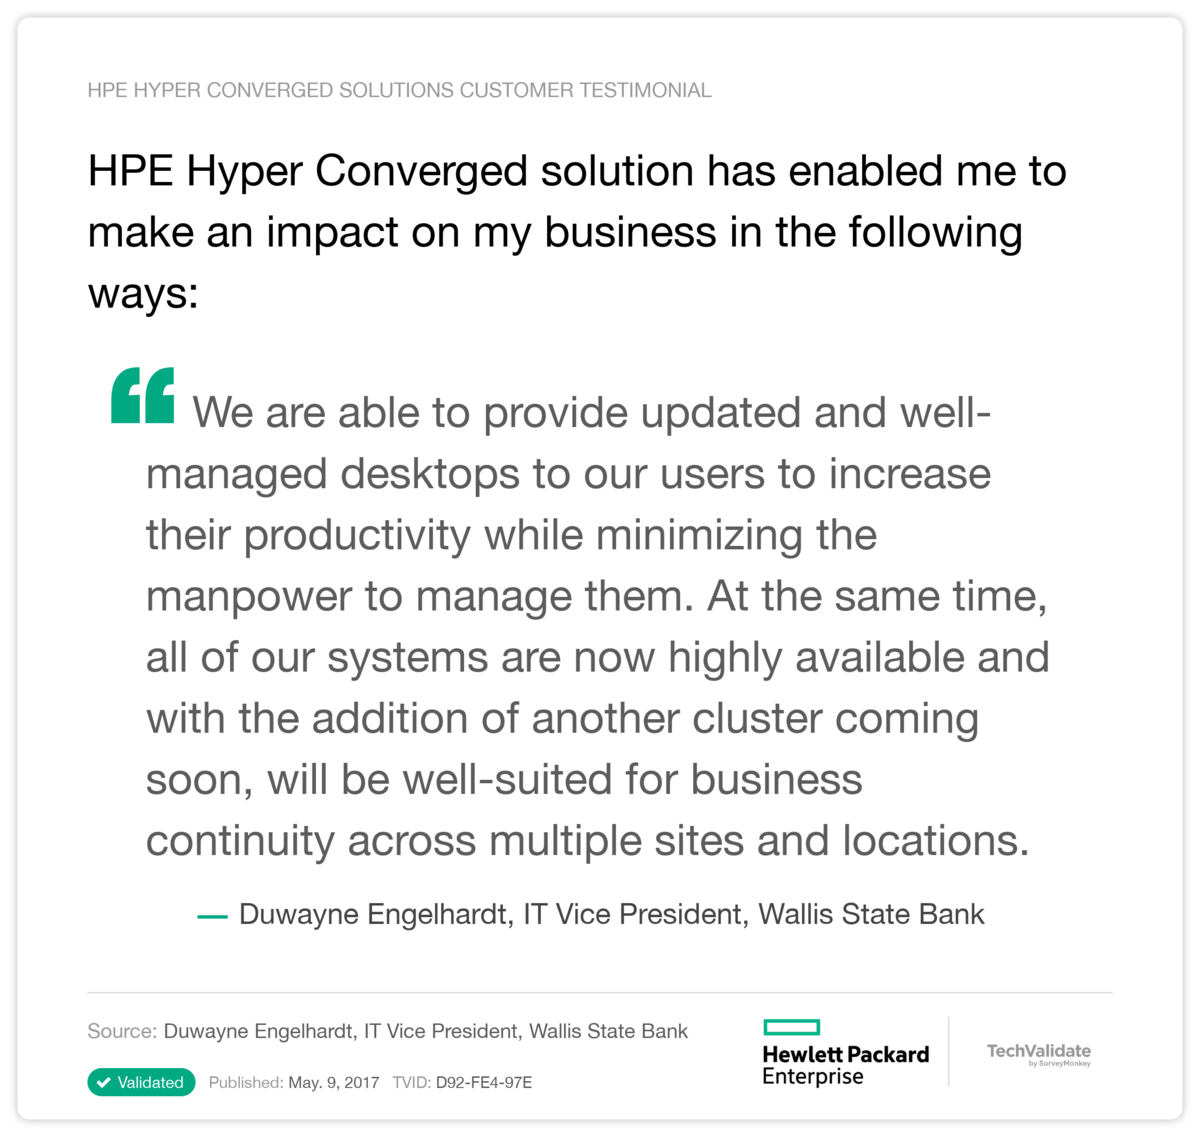 HPE Hyper Converged solution has enabled me to make an impact on my business in the following ways: